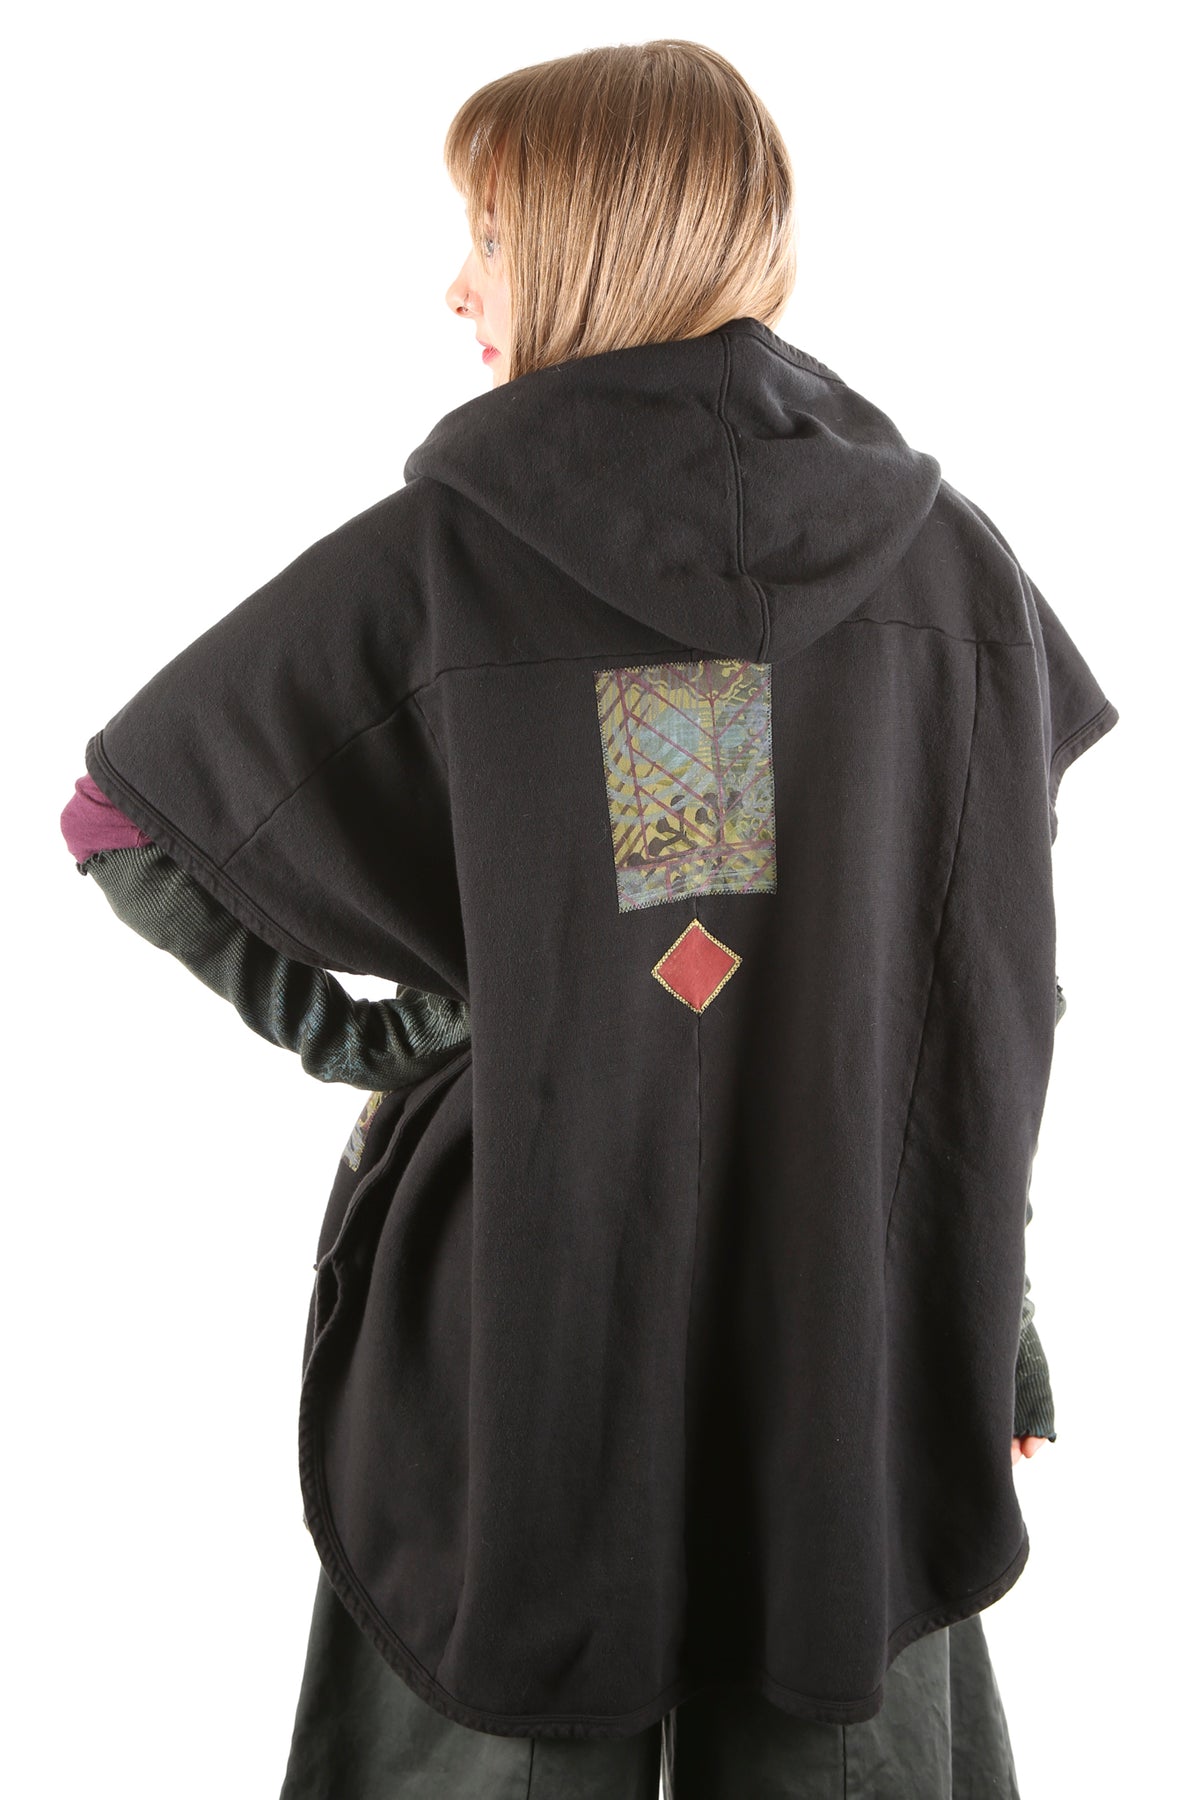 5258 Black Sherpa Hooded Cape -Black-Patched Purples, green #13